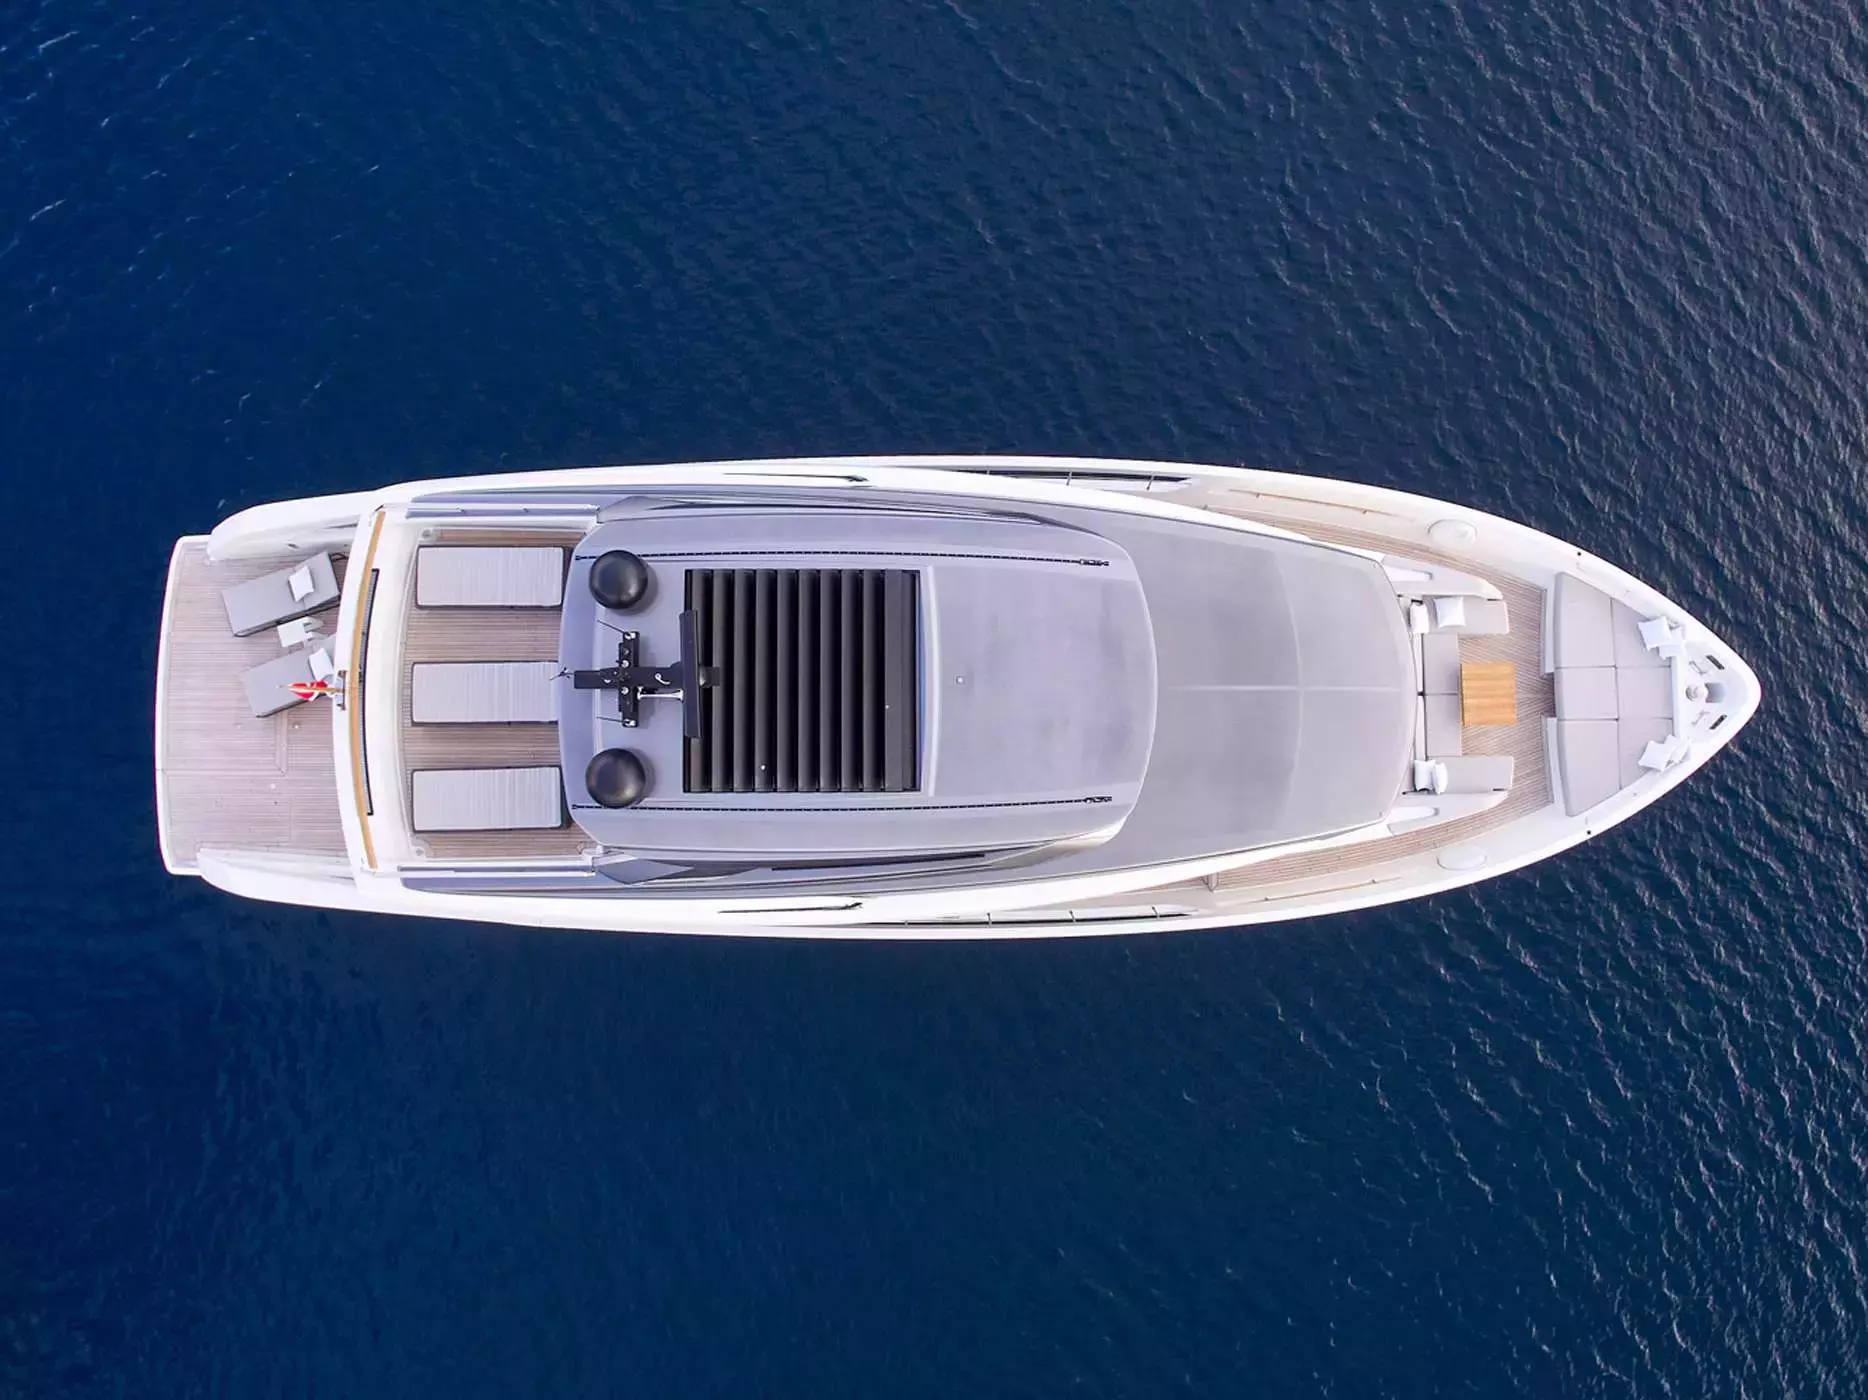 Nirvana by Sanlorenzo - Special Offer for a private Motor Yacht Charter in Santorini with a crew